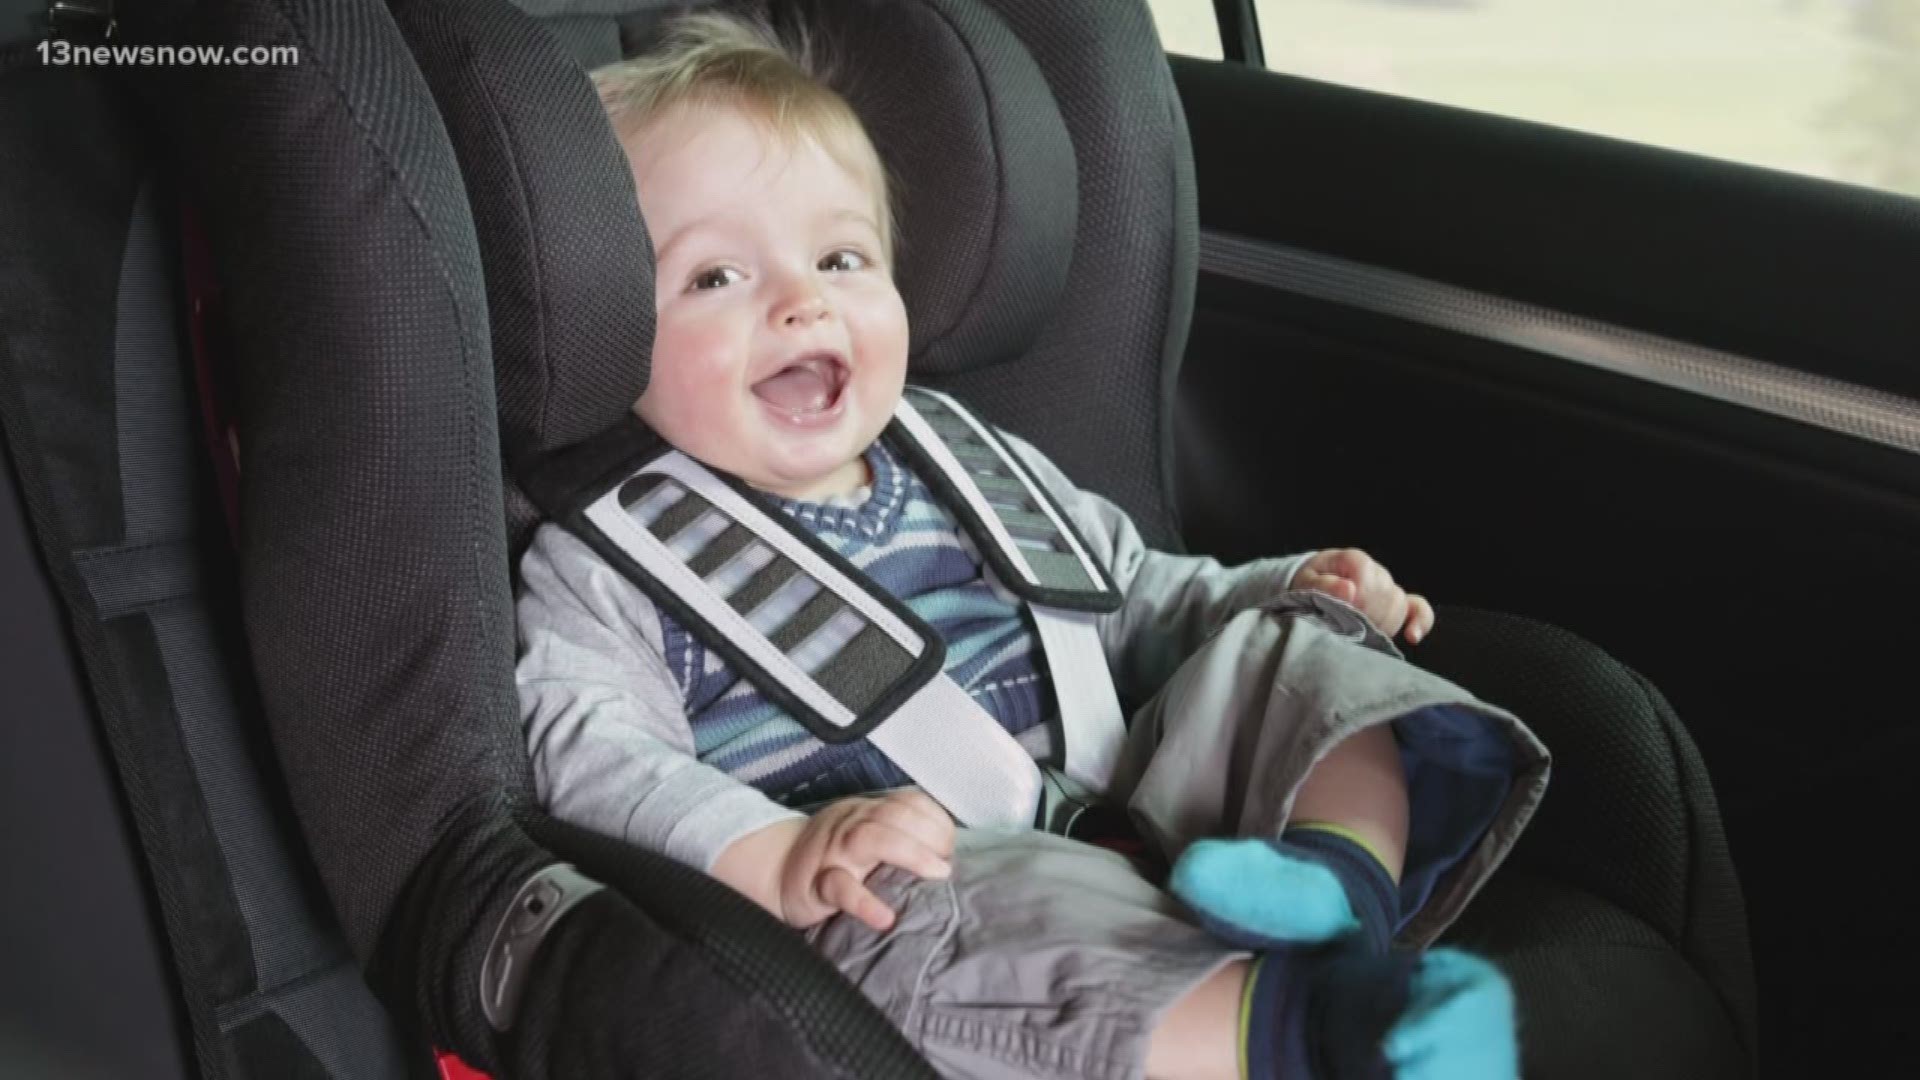 Virginia passed a new law that aims to make sure more children remain in a rear-facing car seat until they're at least two-years-old or meet the minimum weight standards for a forward facing seat.